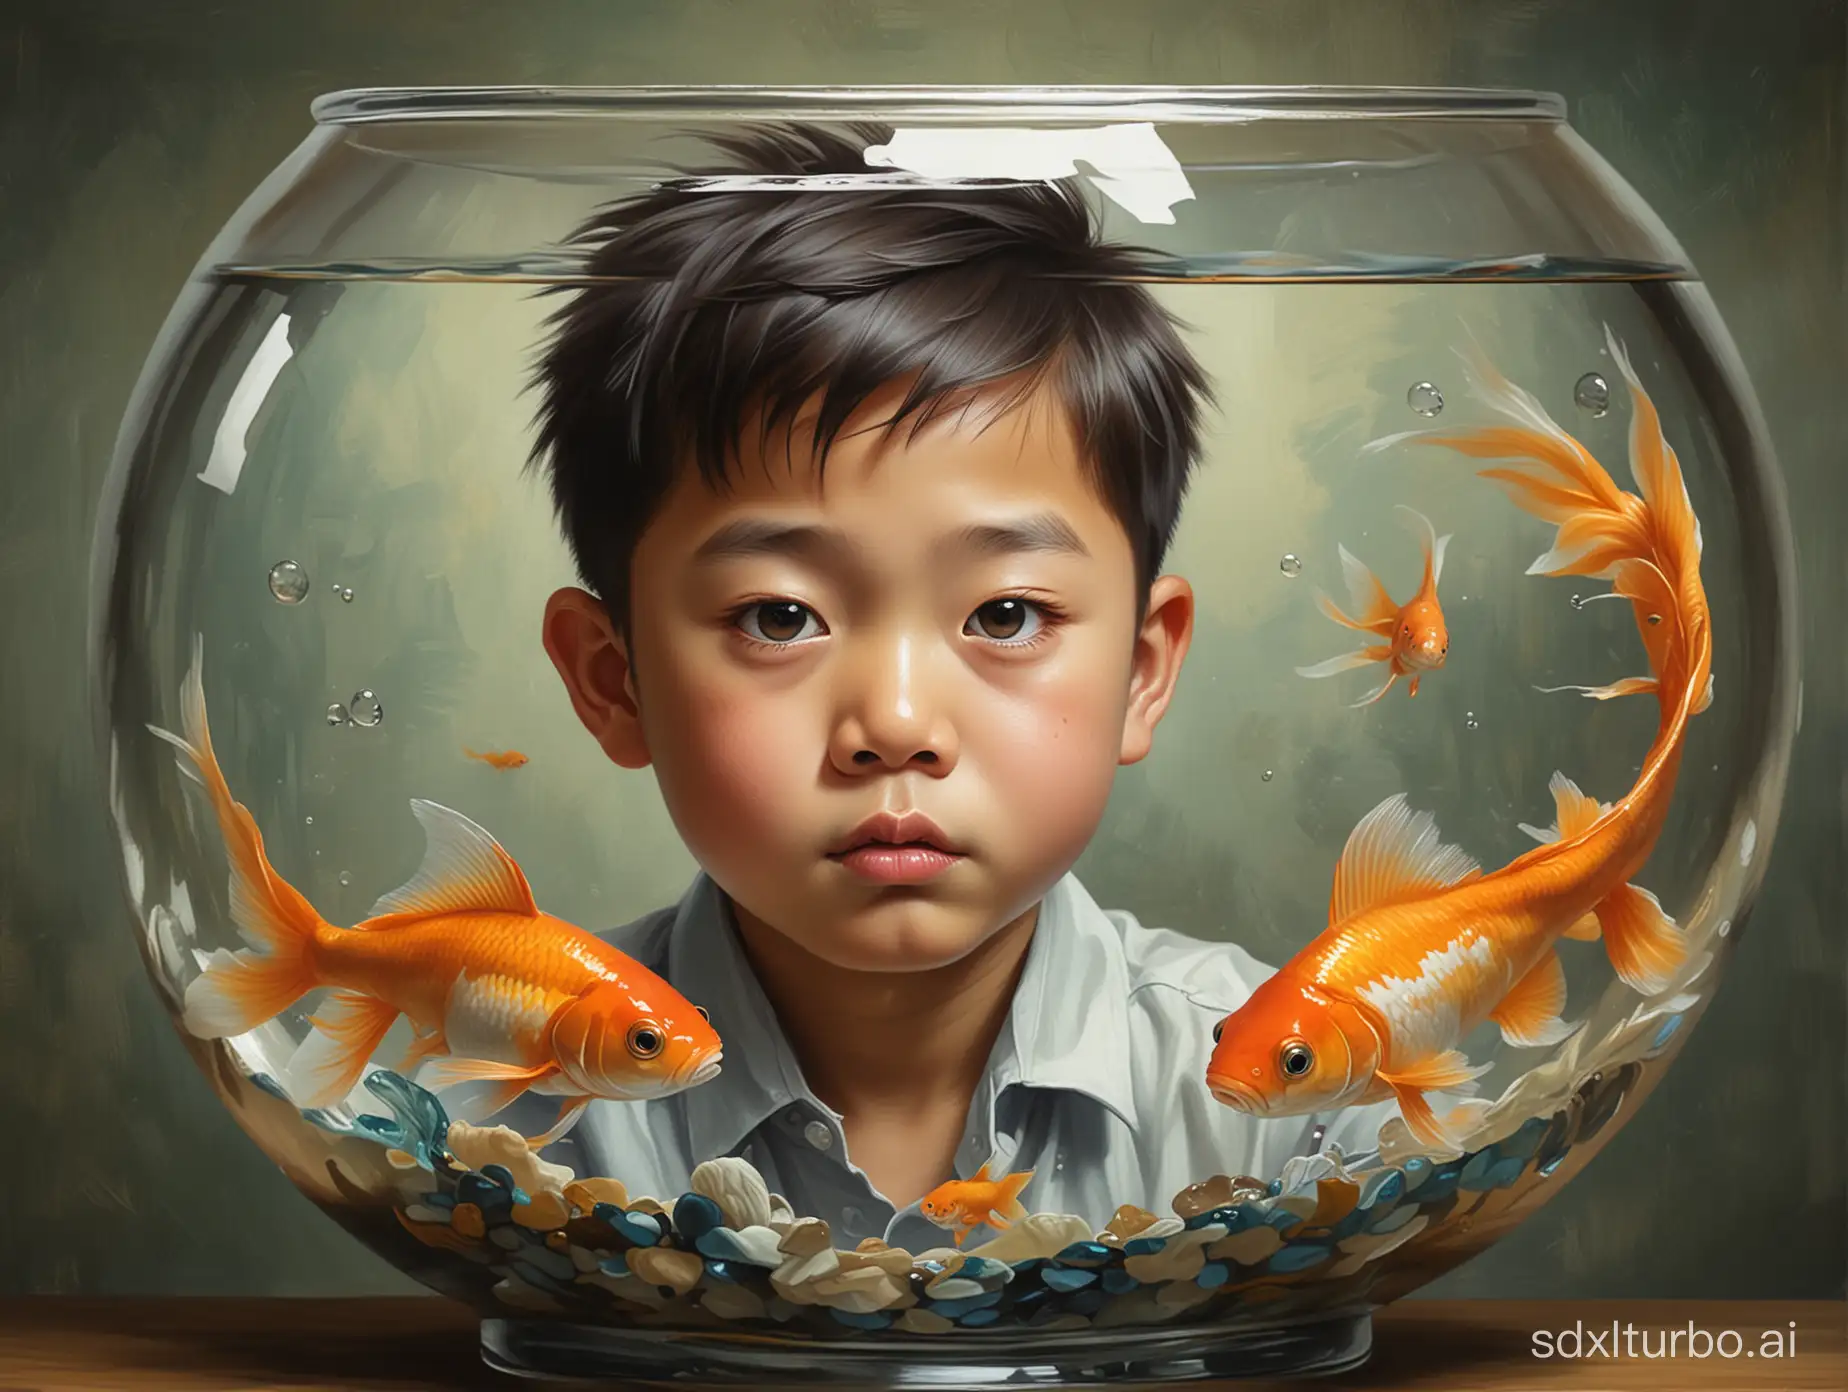 Create an image of a small Korean boy whose hair was tied back and his goldfish in a glass fish bowl. Oil painting style. Parody.